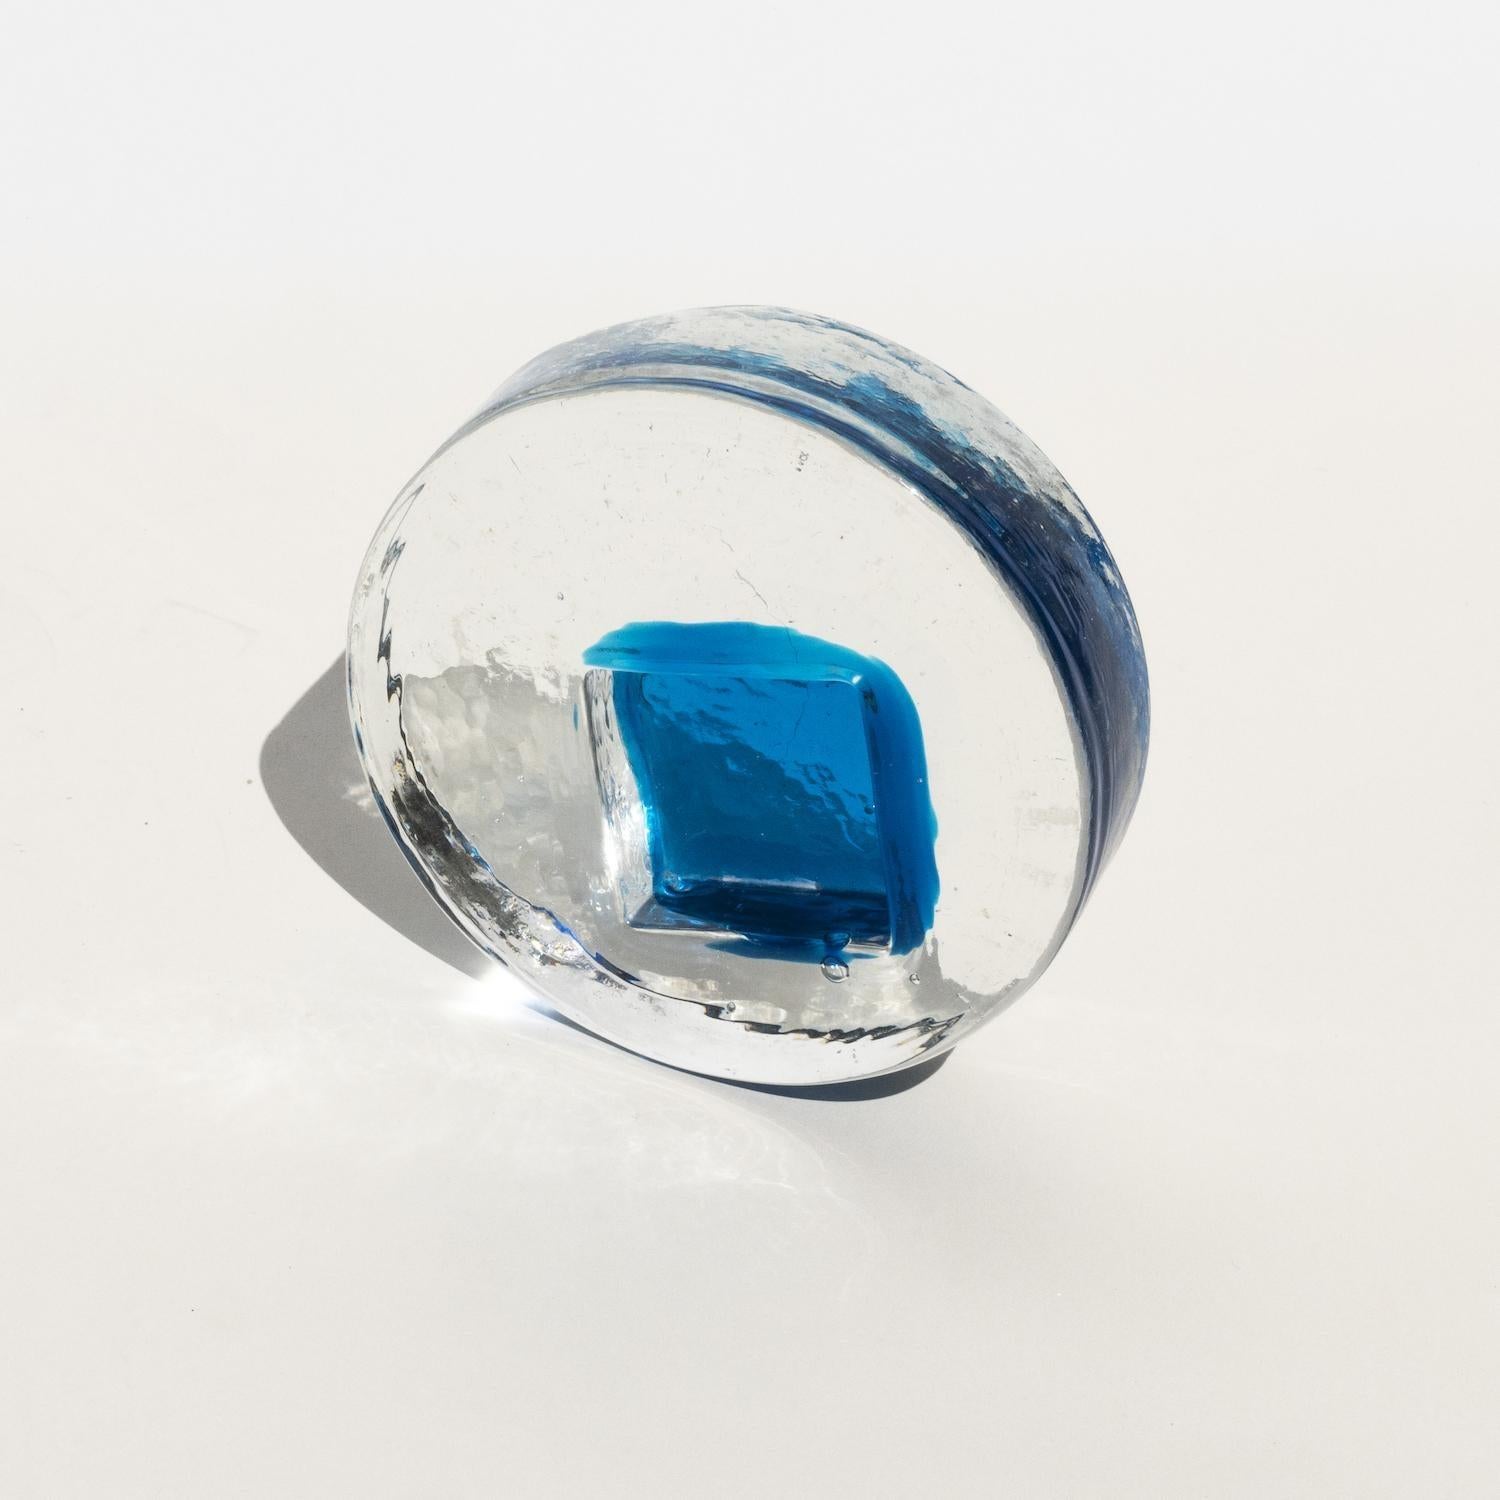 Italian Vintage Mid-Century Murano Glass Ashtray in Frosted Glass with Blue Accents For Sale